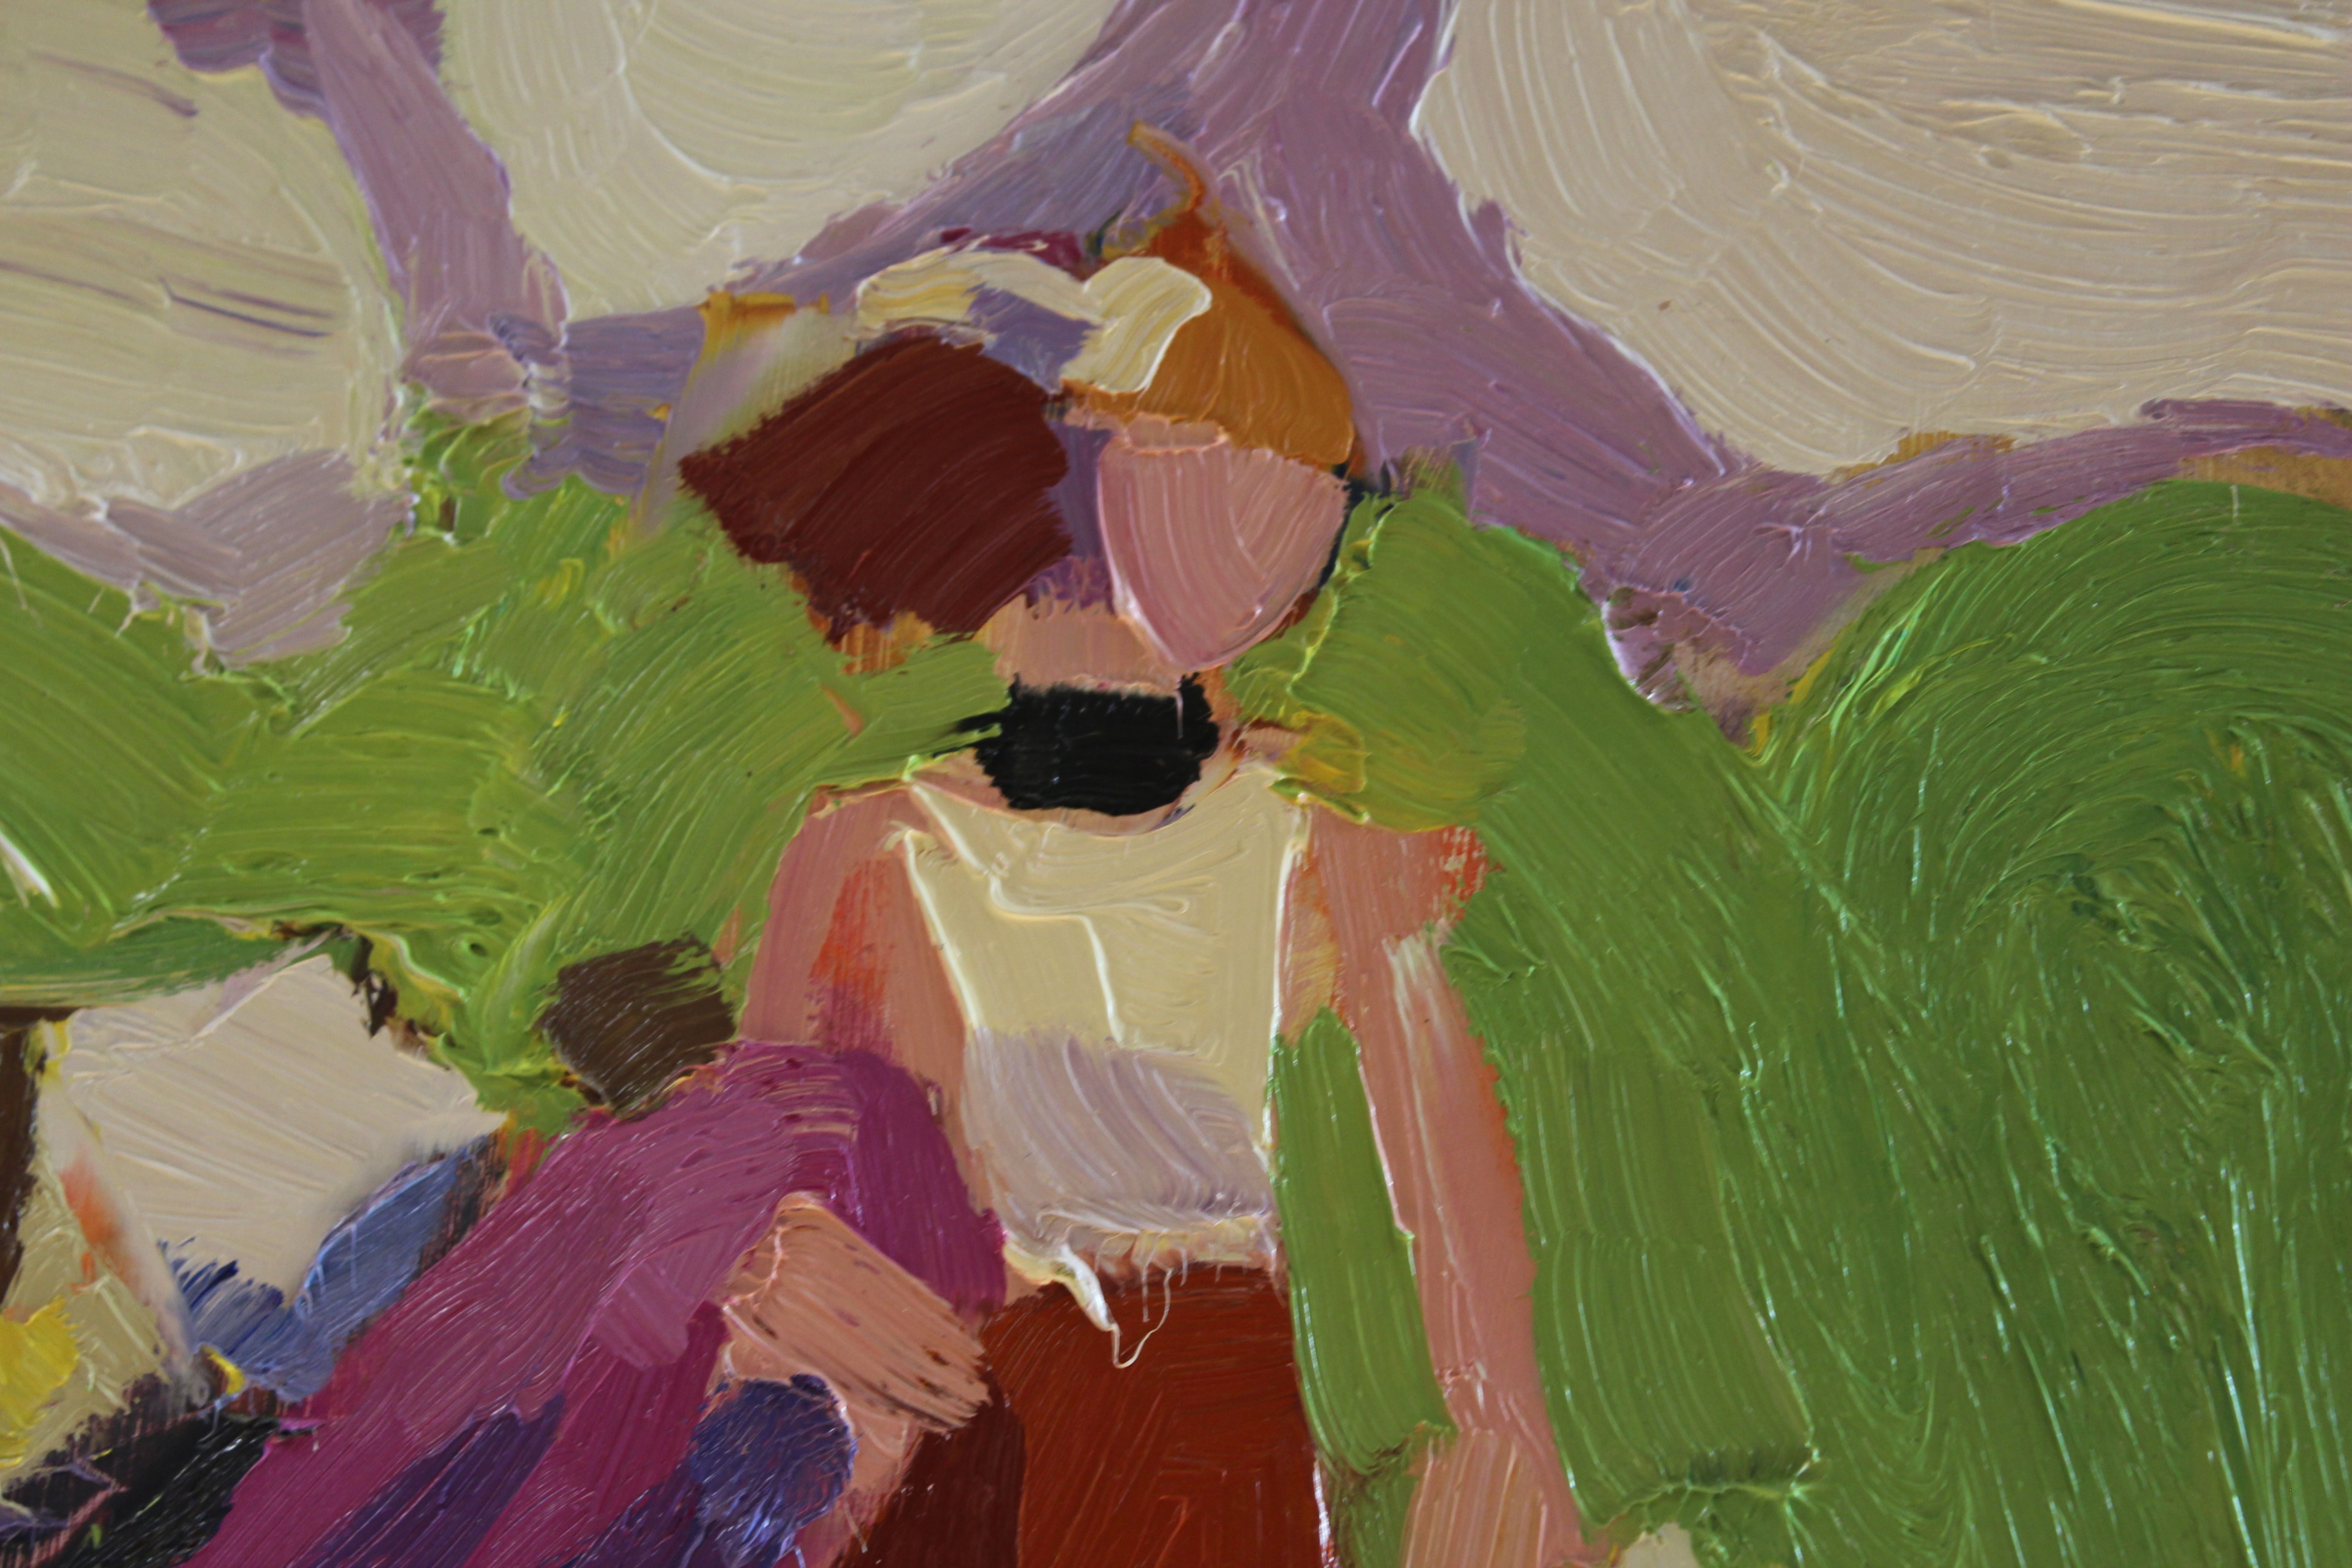 One of Julian's pieces from the exhibition; a woman in front of a brightly colourful background with prominent brush strokes.